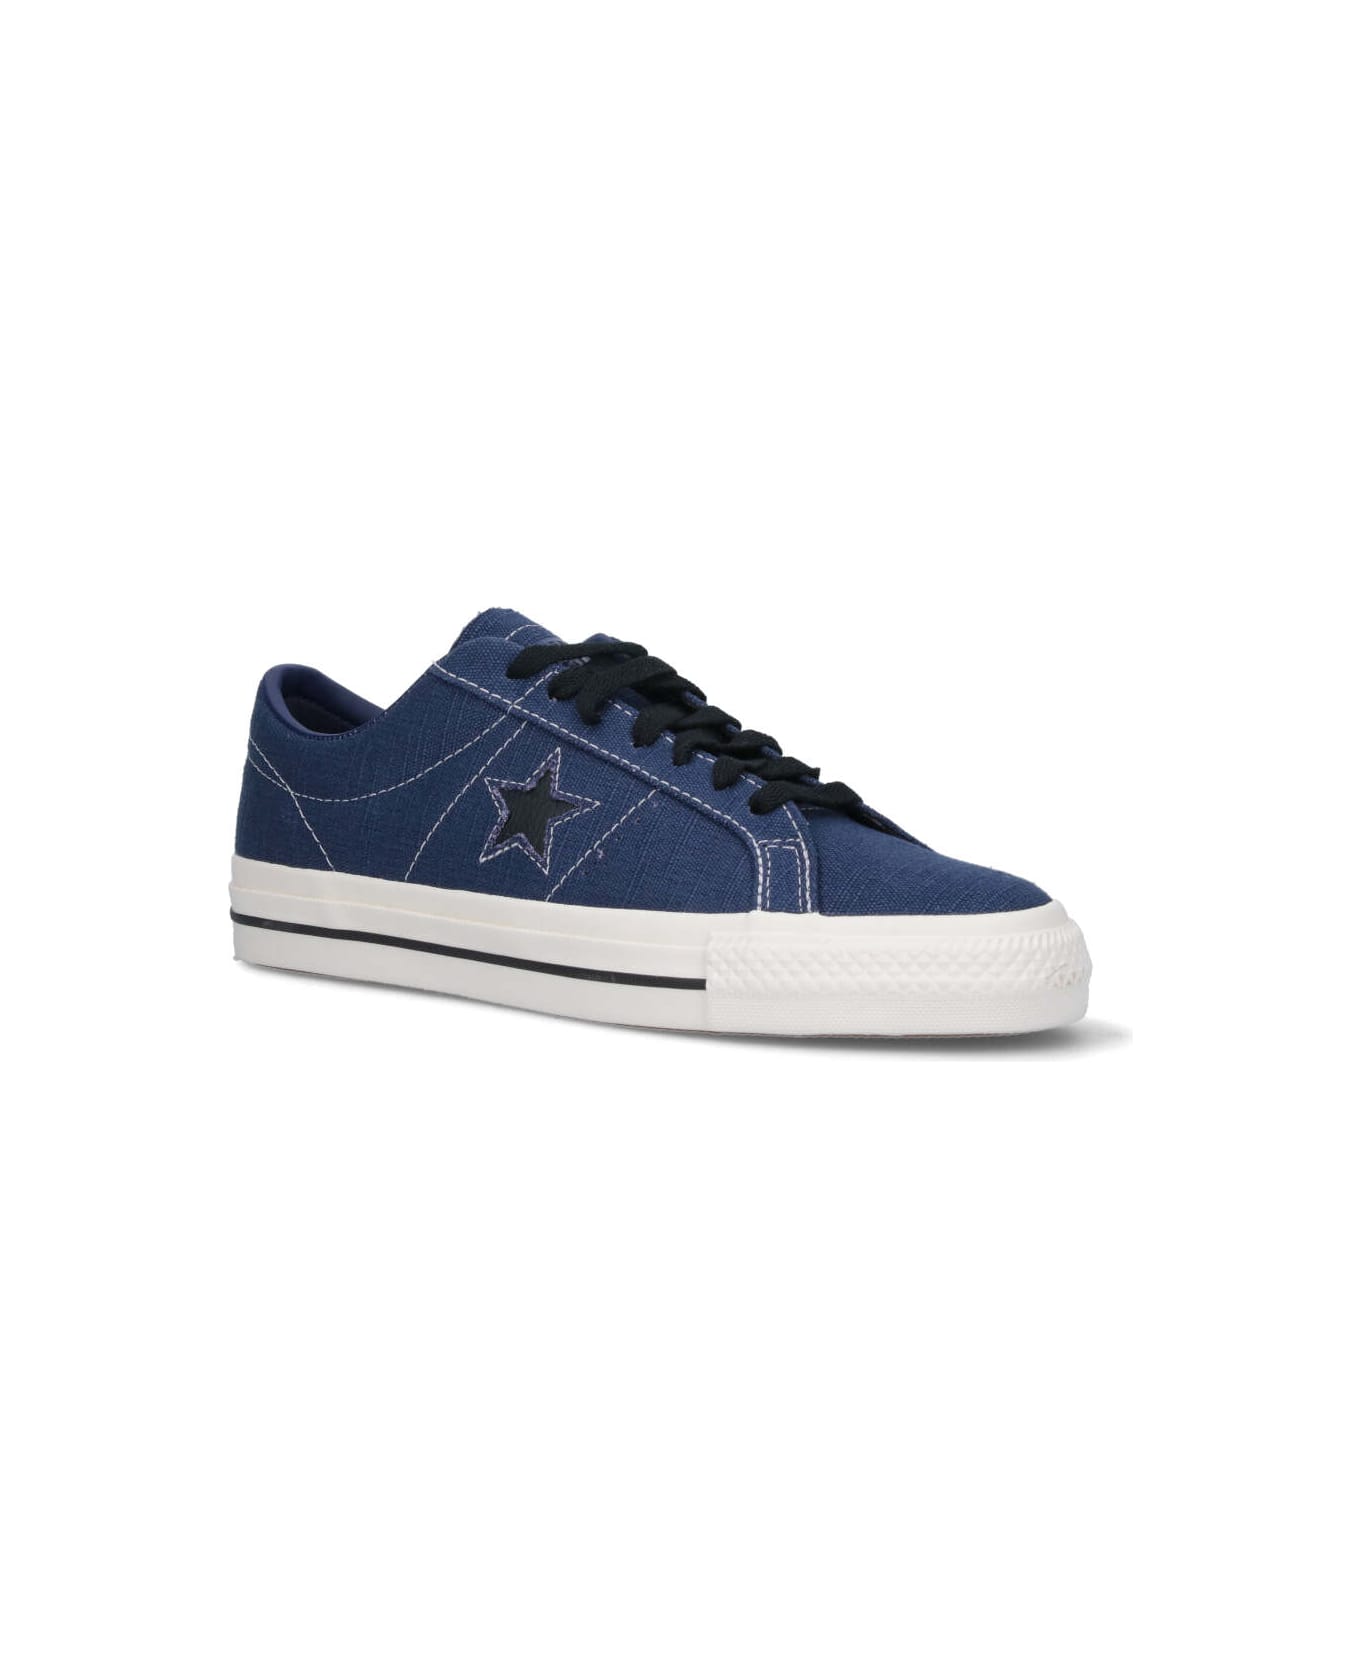 Converse "cons One Star Pro" Sneakers - Blue